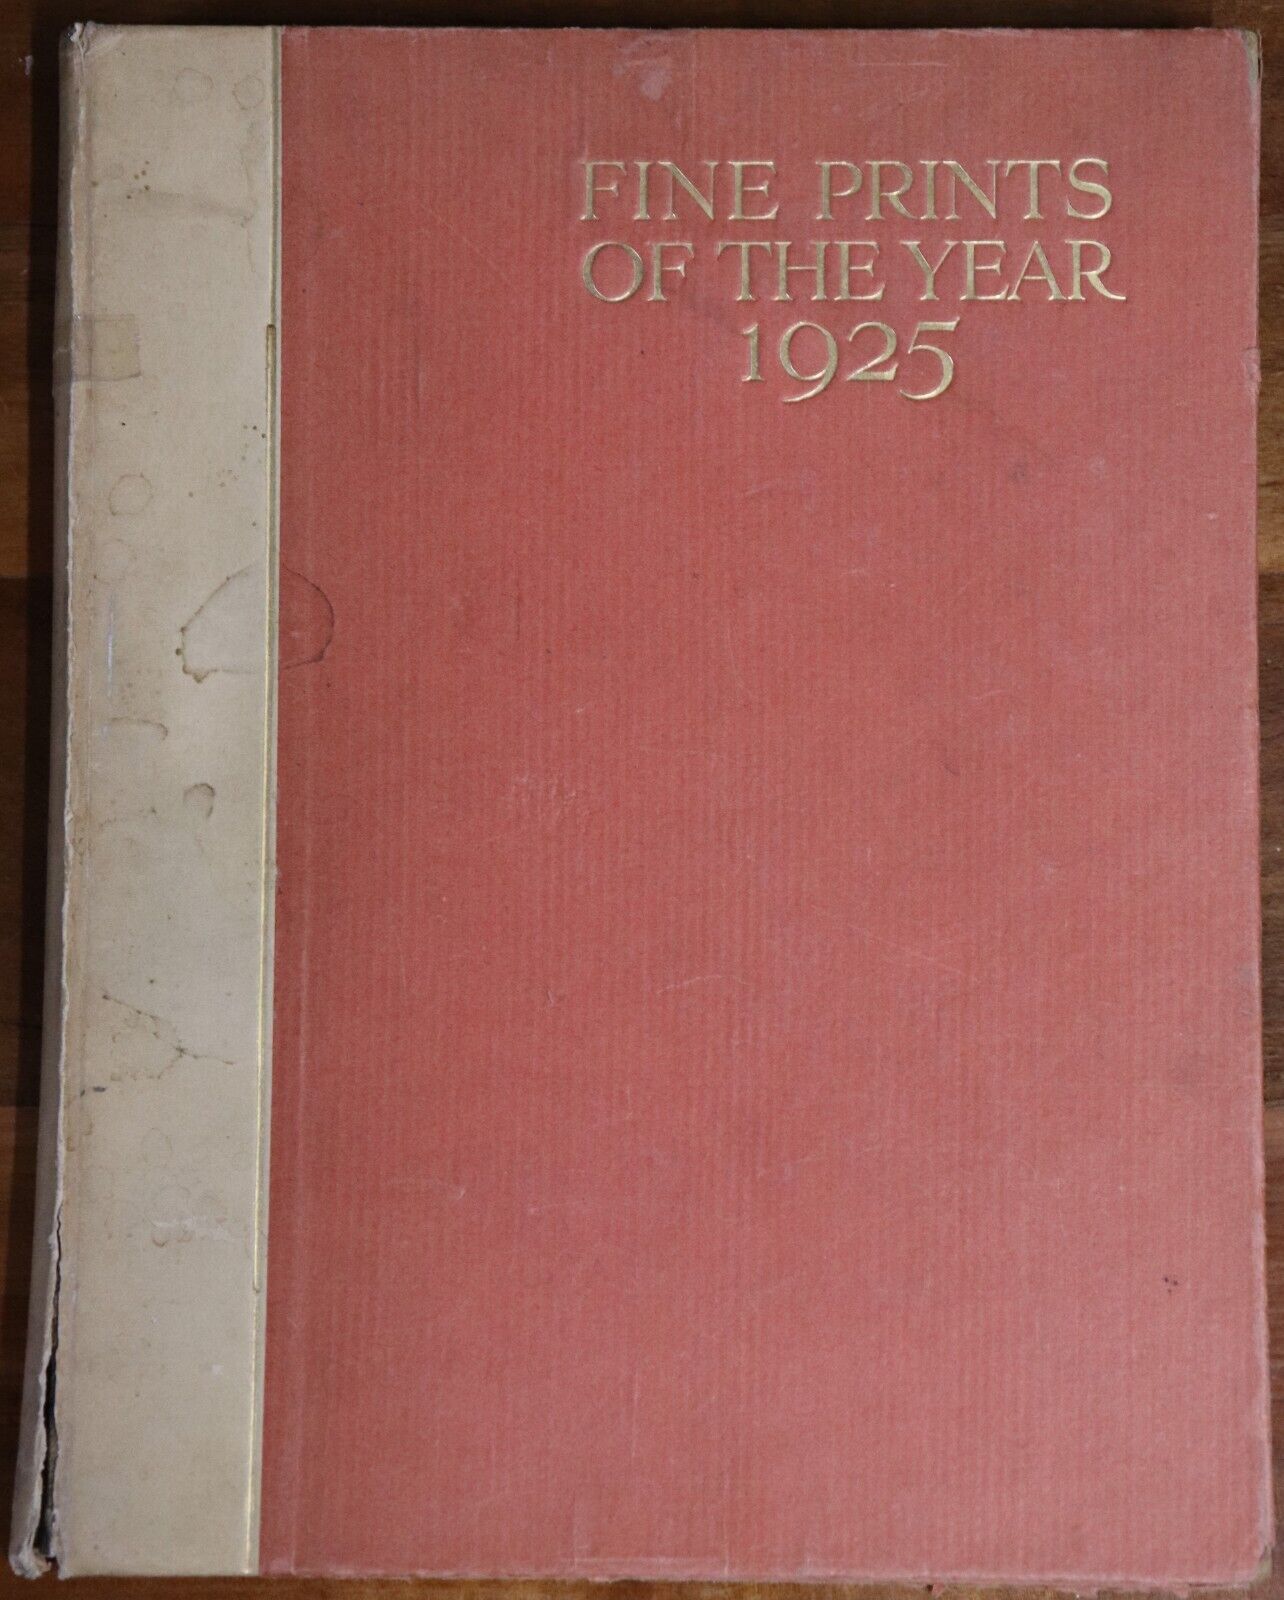 Fine Prints Of The Year: Etching & Engraving - 1926 - Antique Art Book